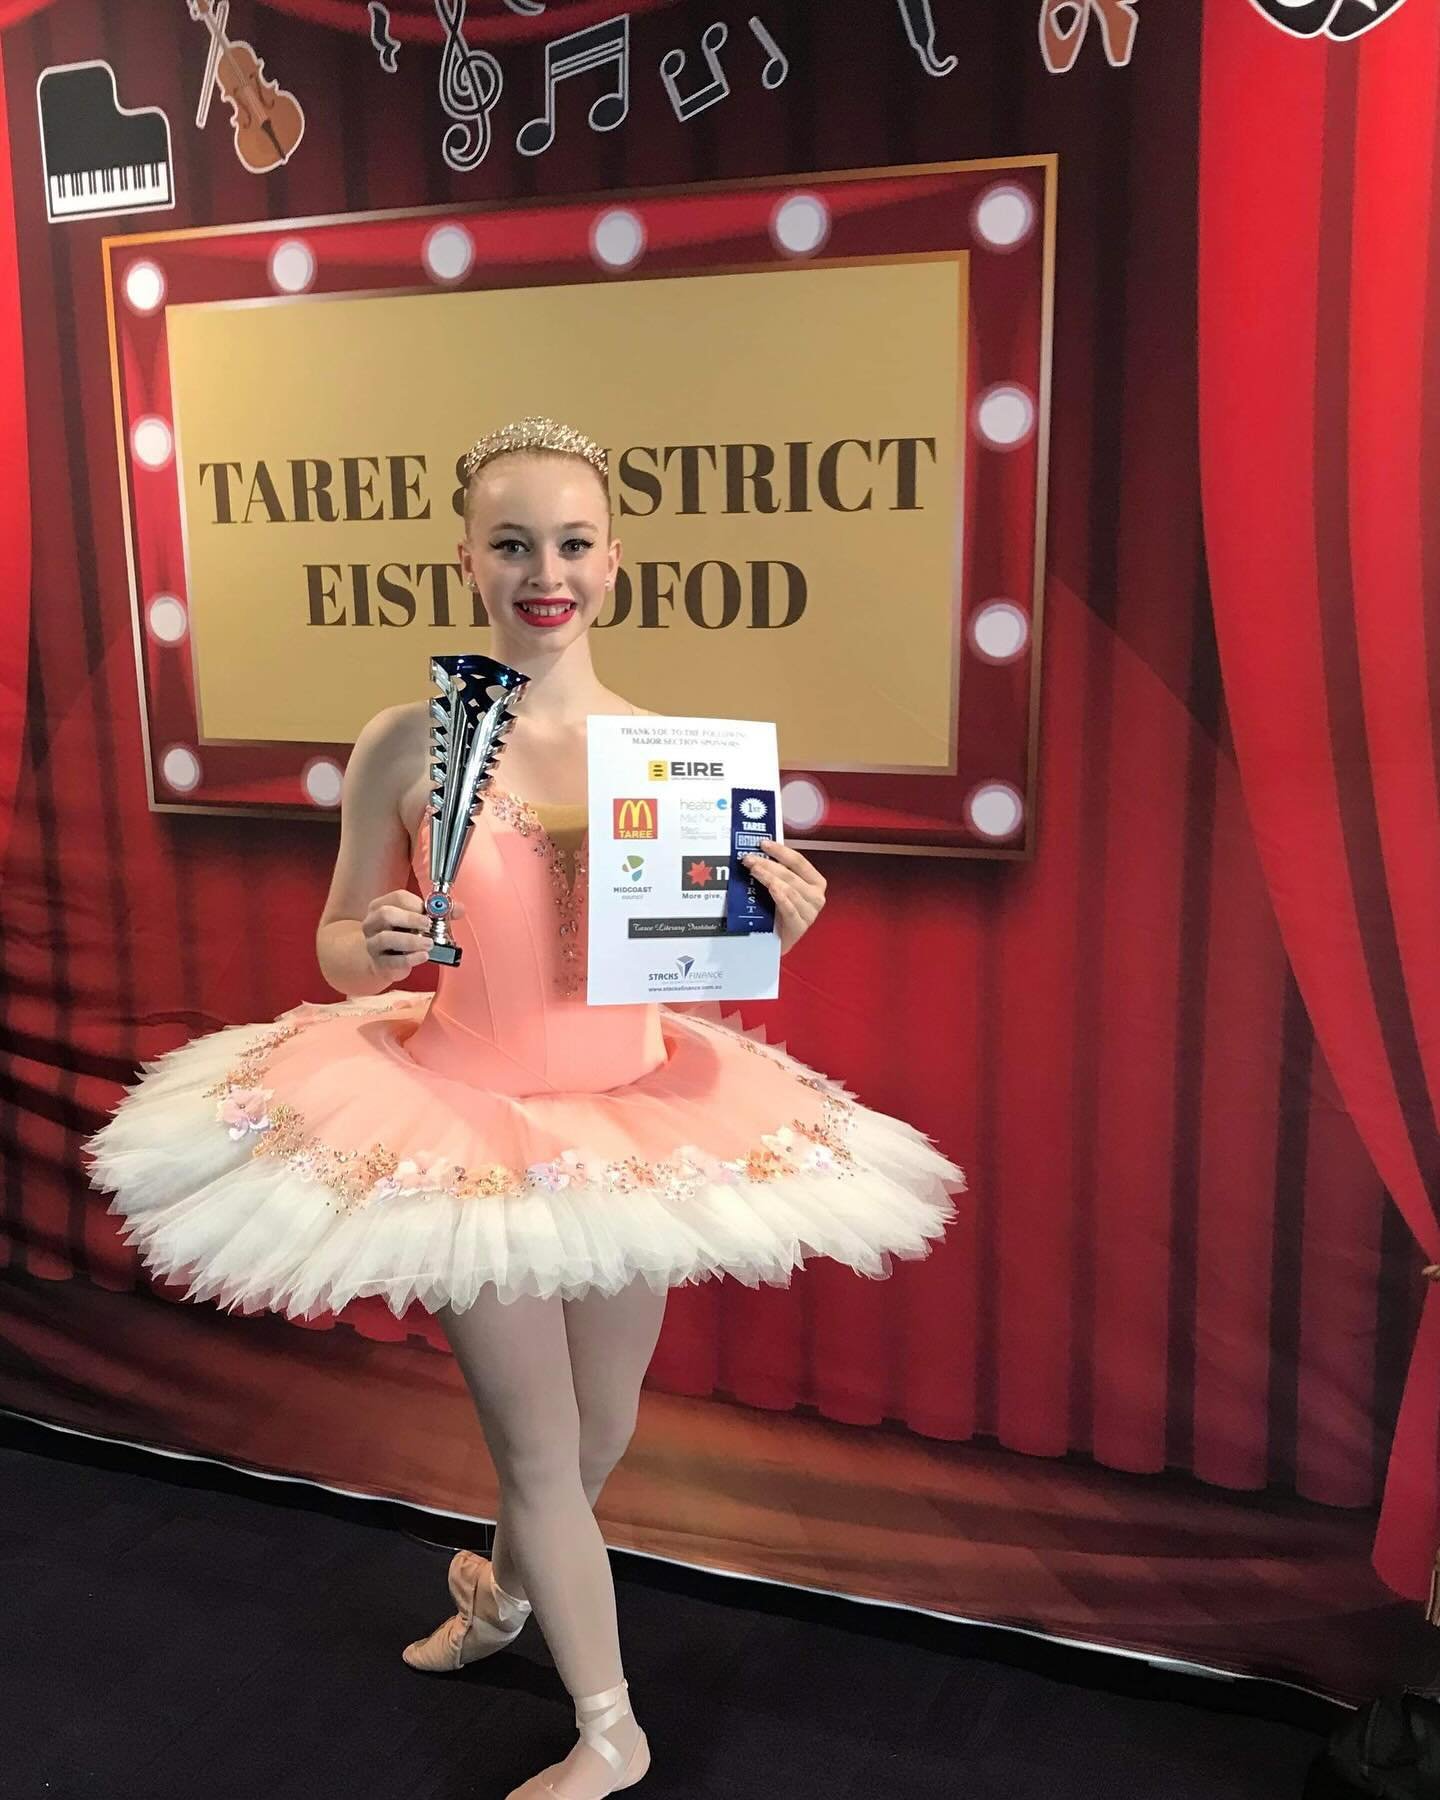 Congratulations to all of our district competitors who competed in the Taree and District Eisteddfod Monday&hellip; we are so proud of you 💕

Tahlia/August:
1st- Lyrical Duo

Harper/Bella:
1st- Jazz Duo

Kannika:
1st- Lyrical 

Ella:
1st- Ballet
2nd